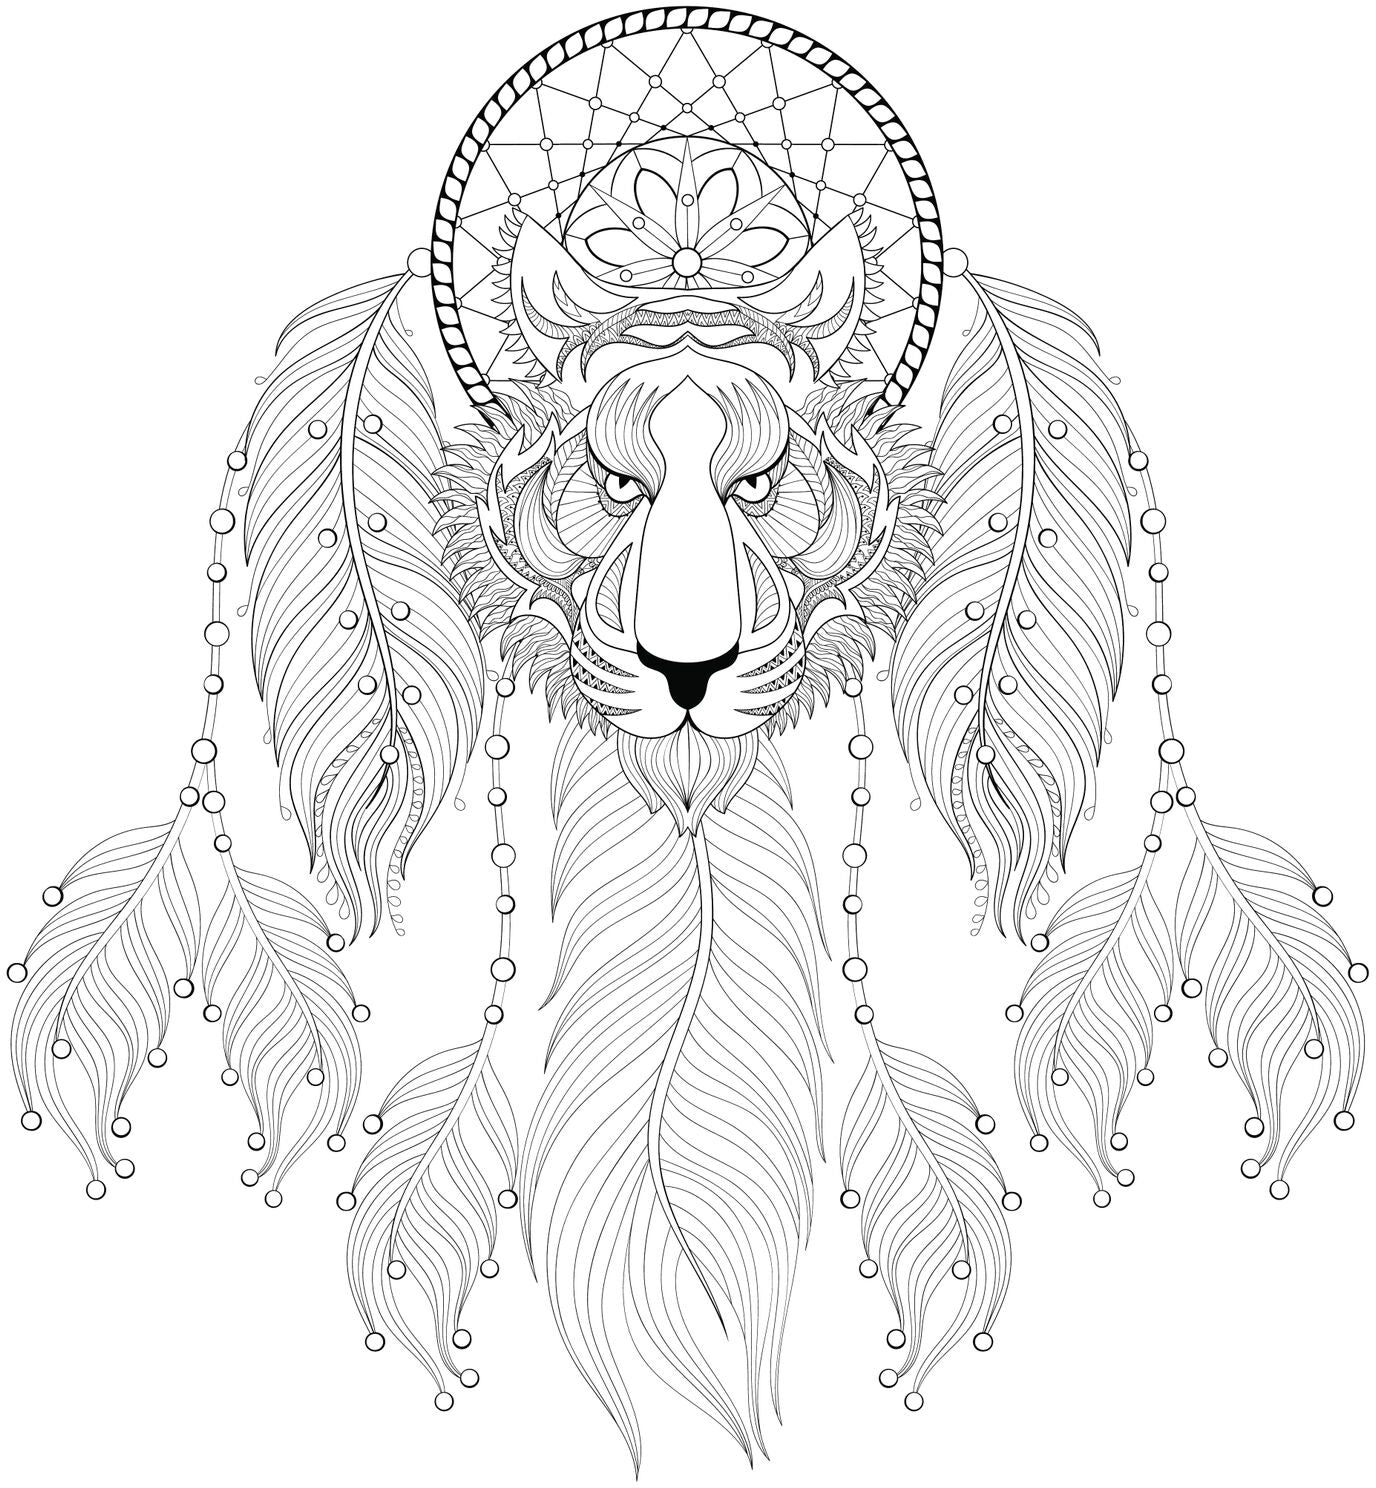 Intense Lion with Dream Catcher and Feathers Vinyl Decal Sticker